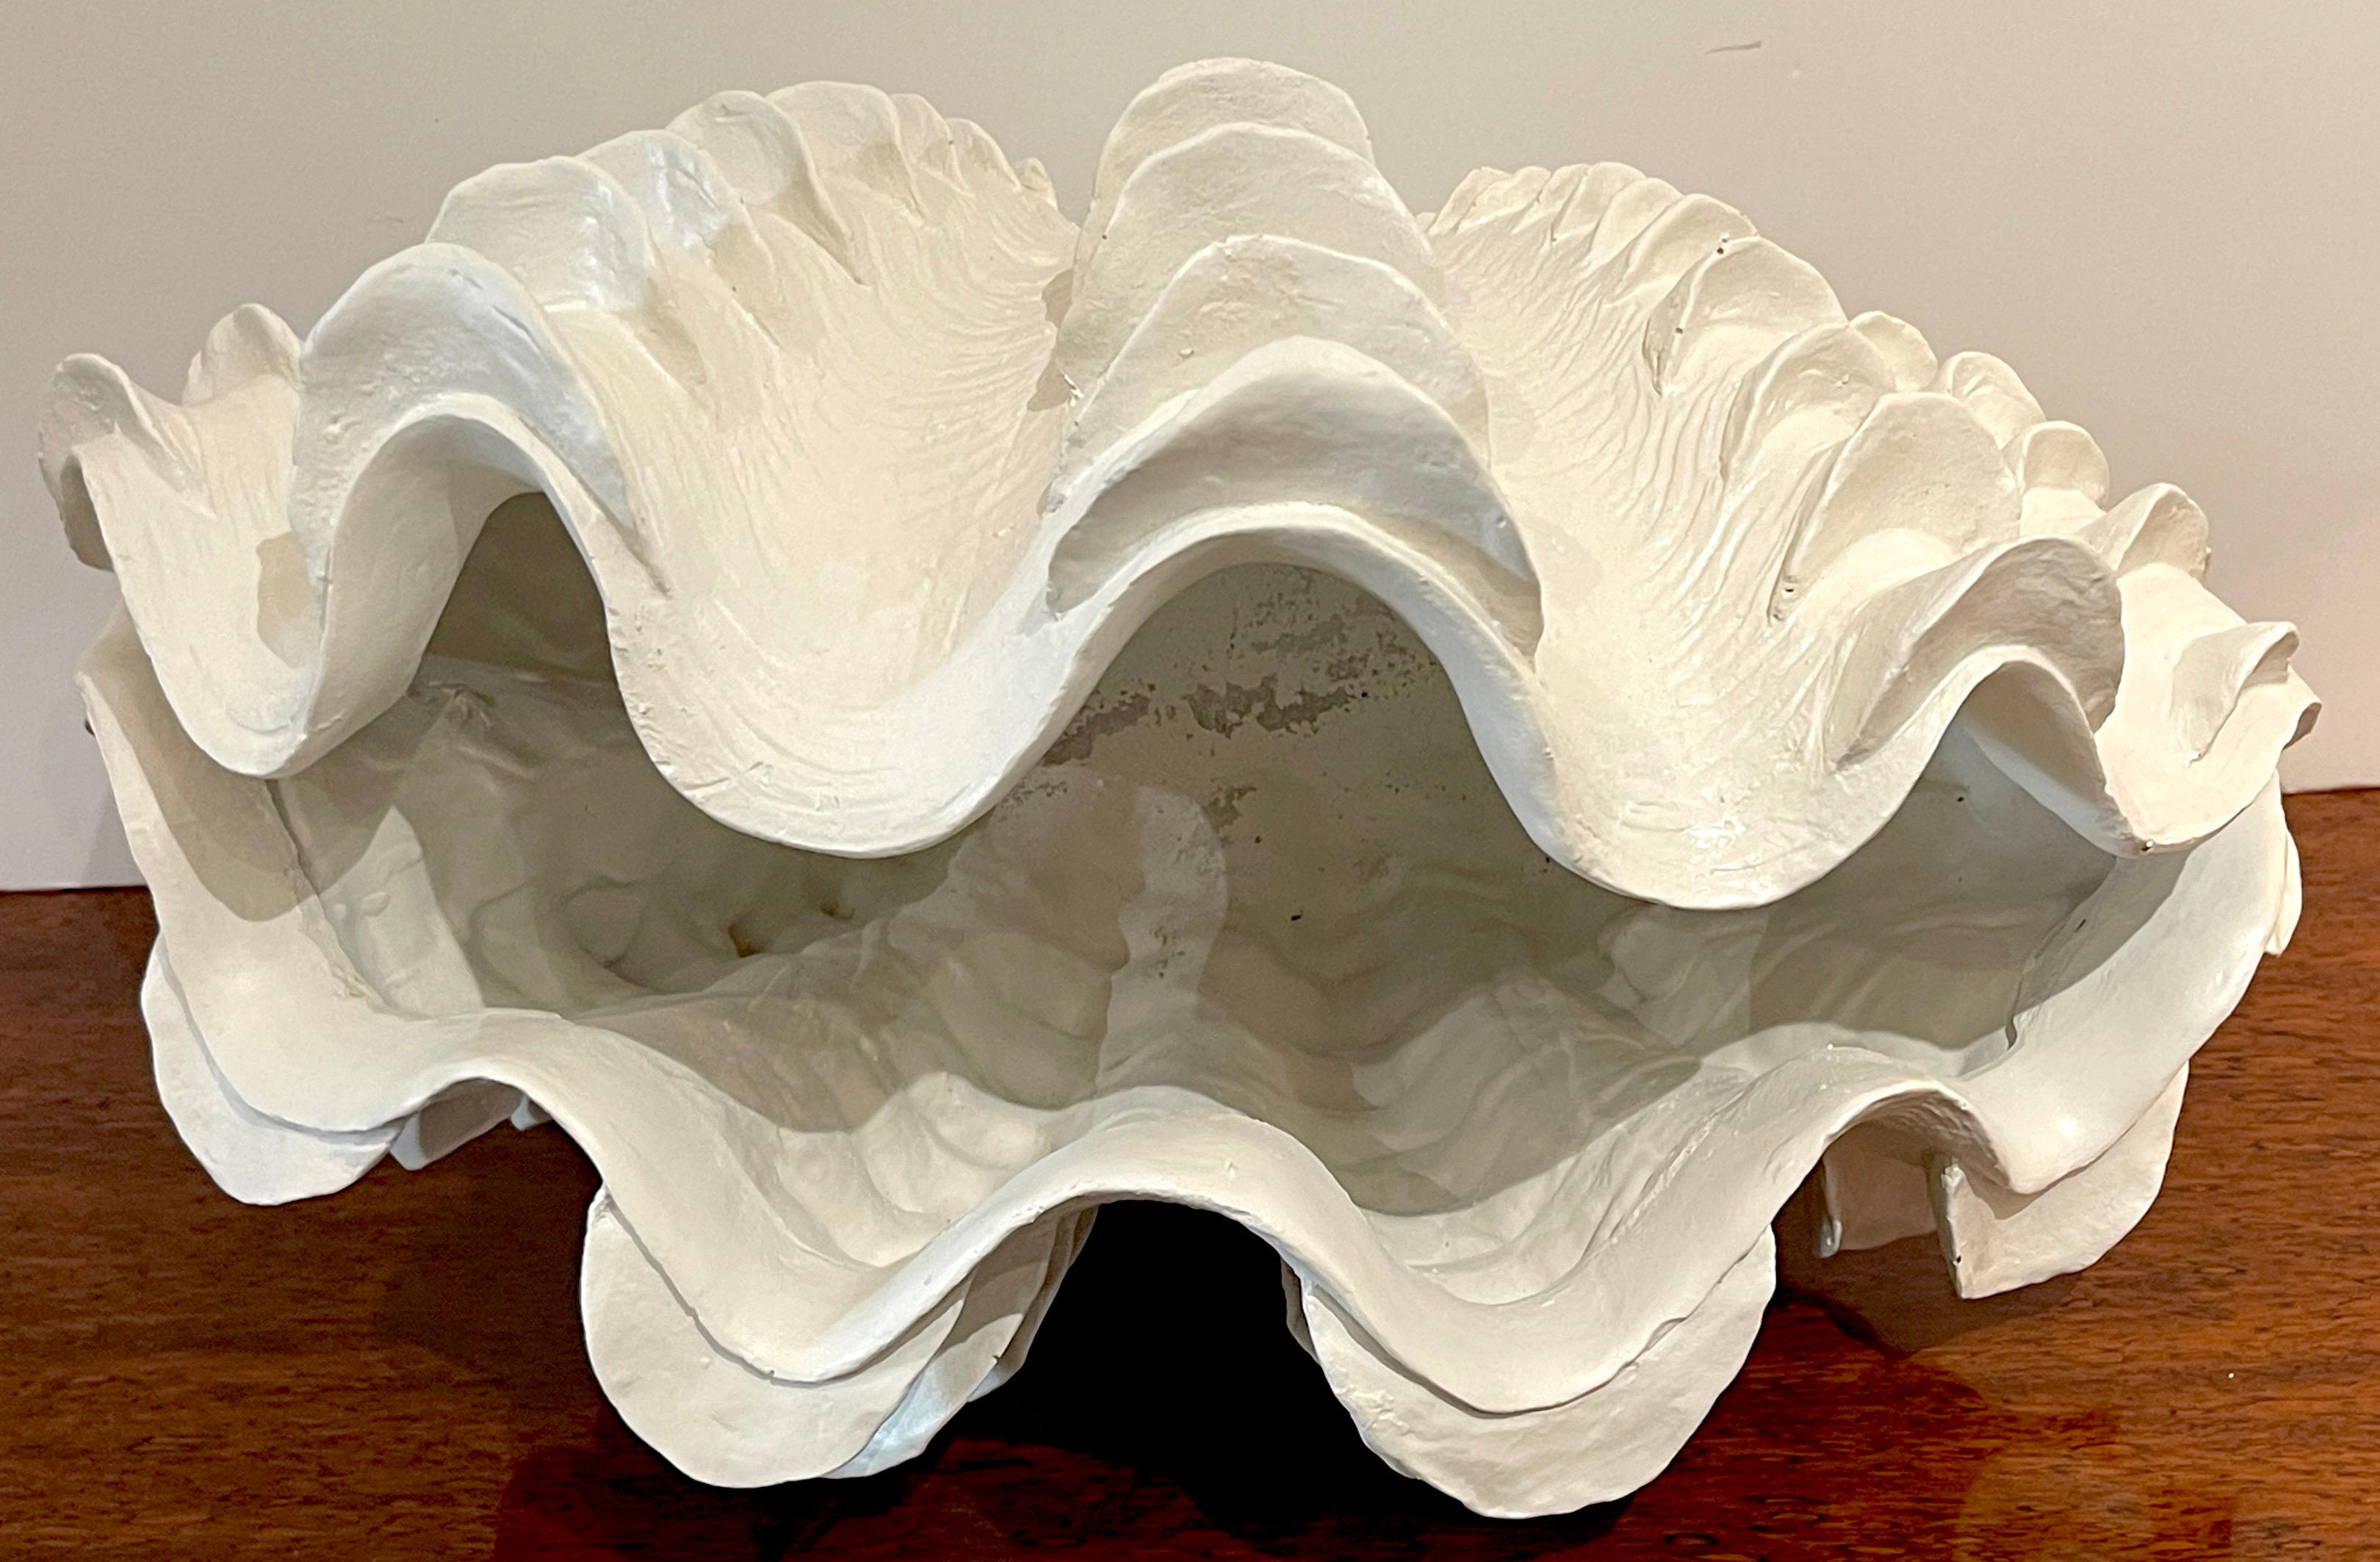 Composition Mid Century Lacquered Giant Clam 'Tridacna Gigas' Shell Vase